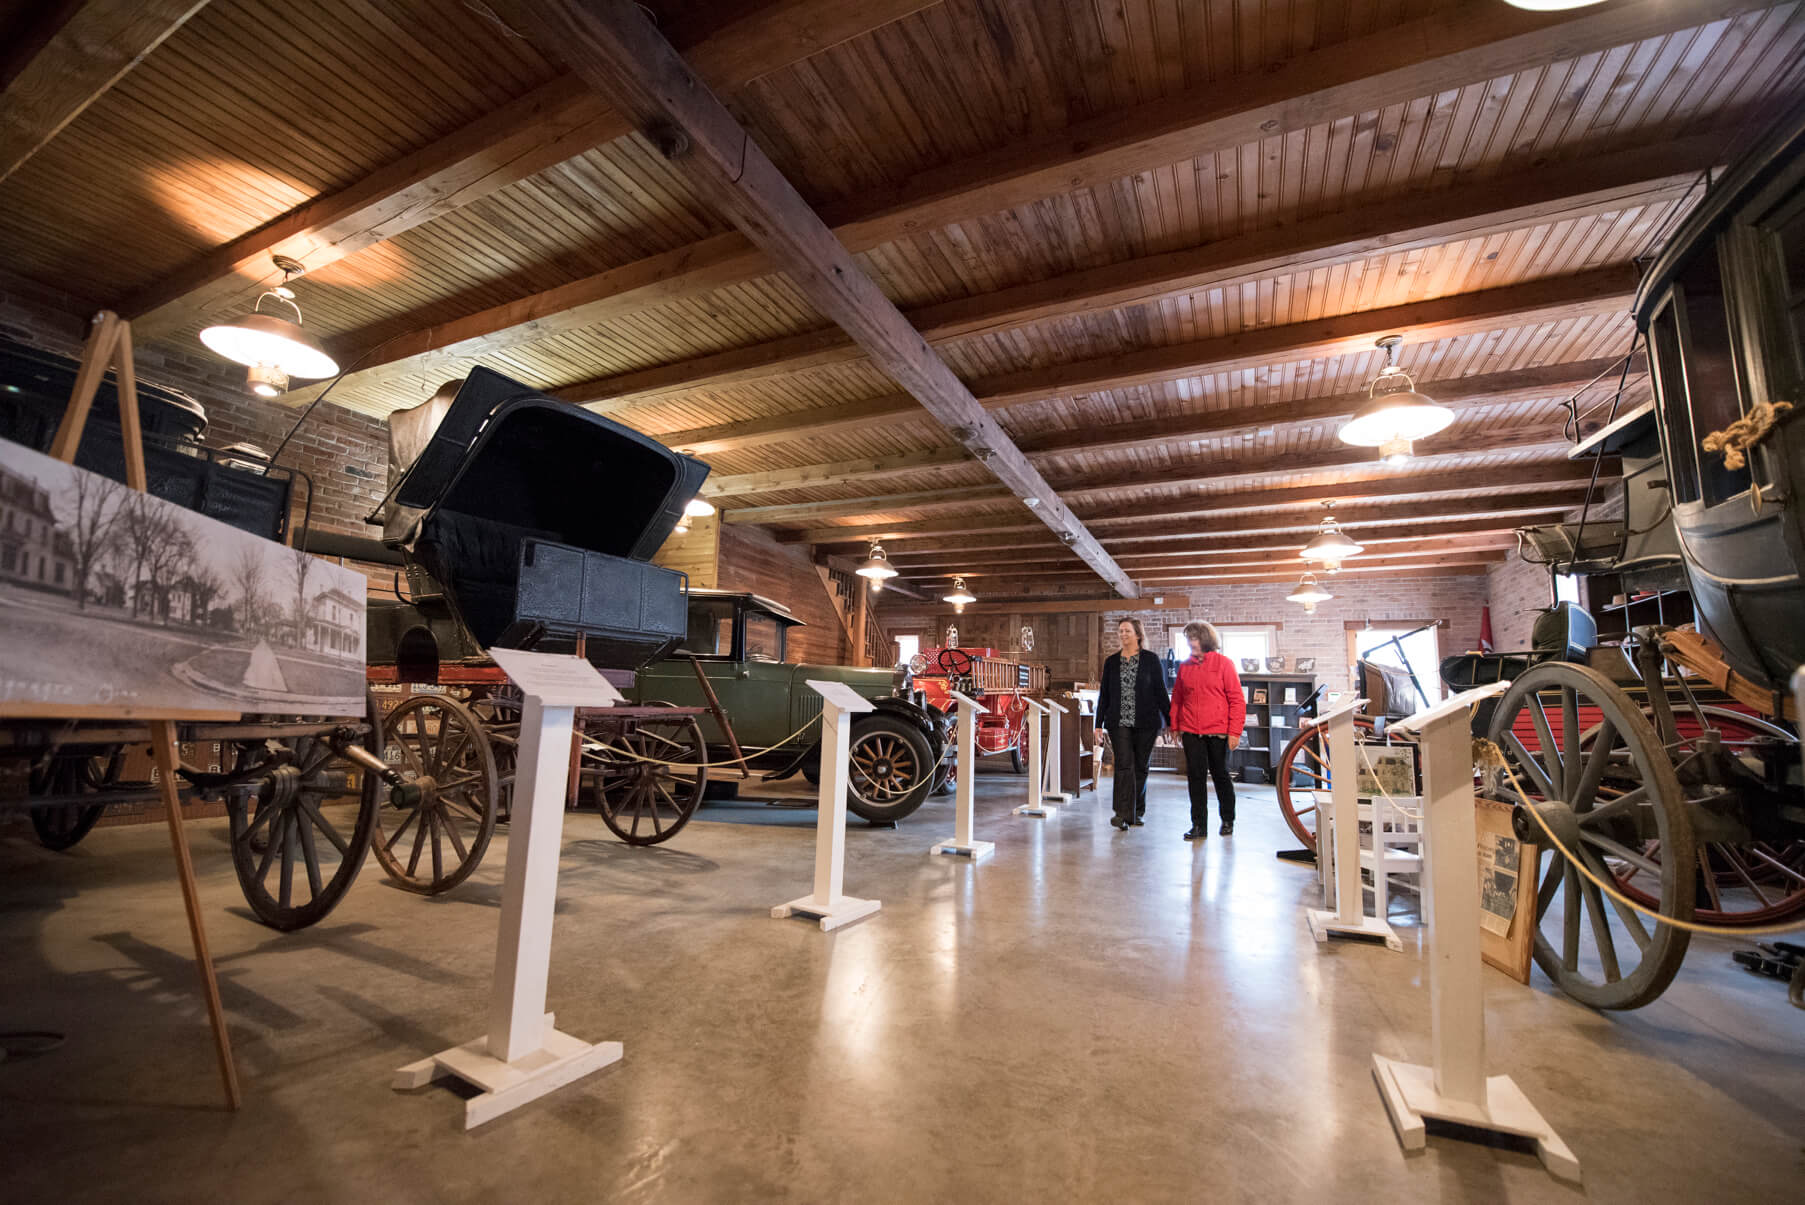 Vehicle display inside the Hubbard Carriage House